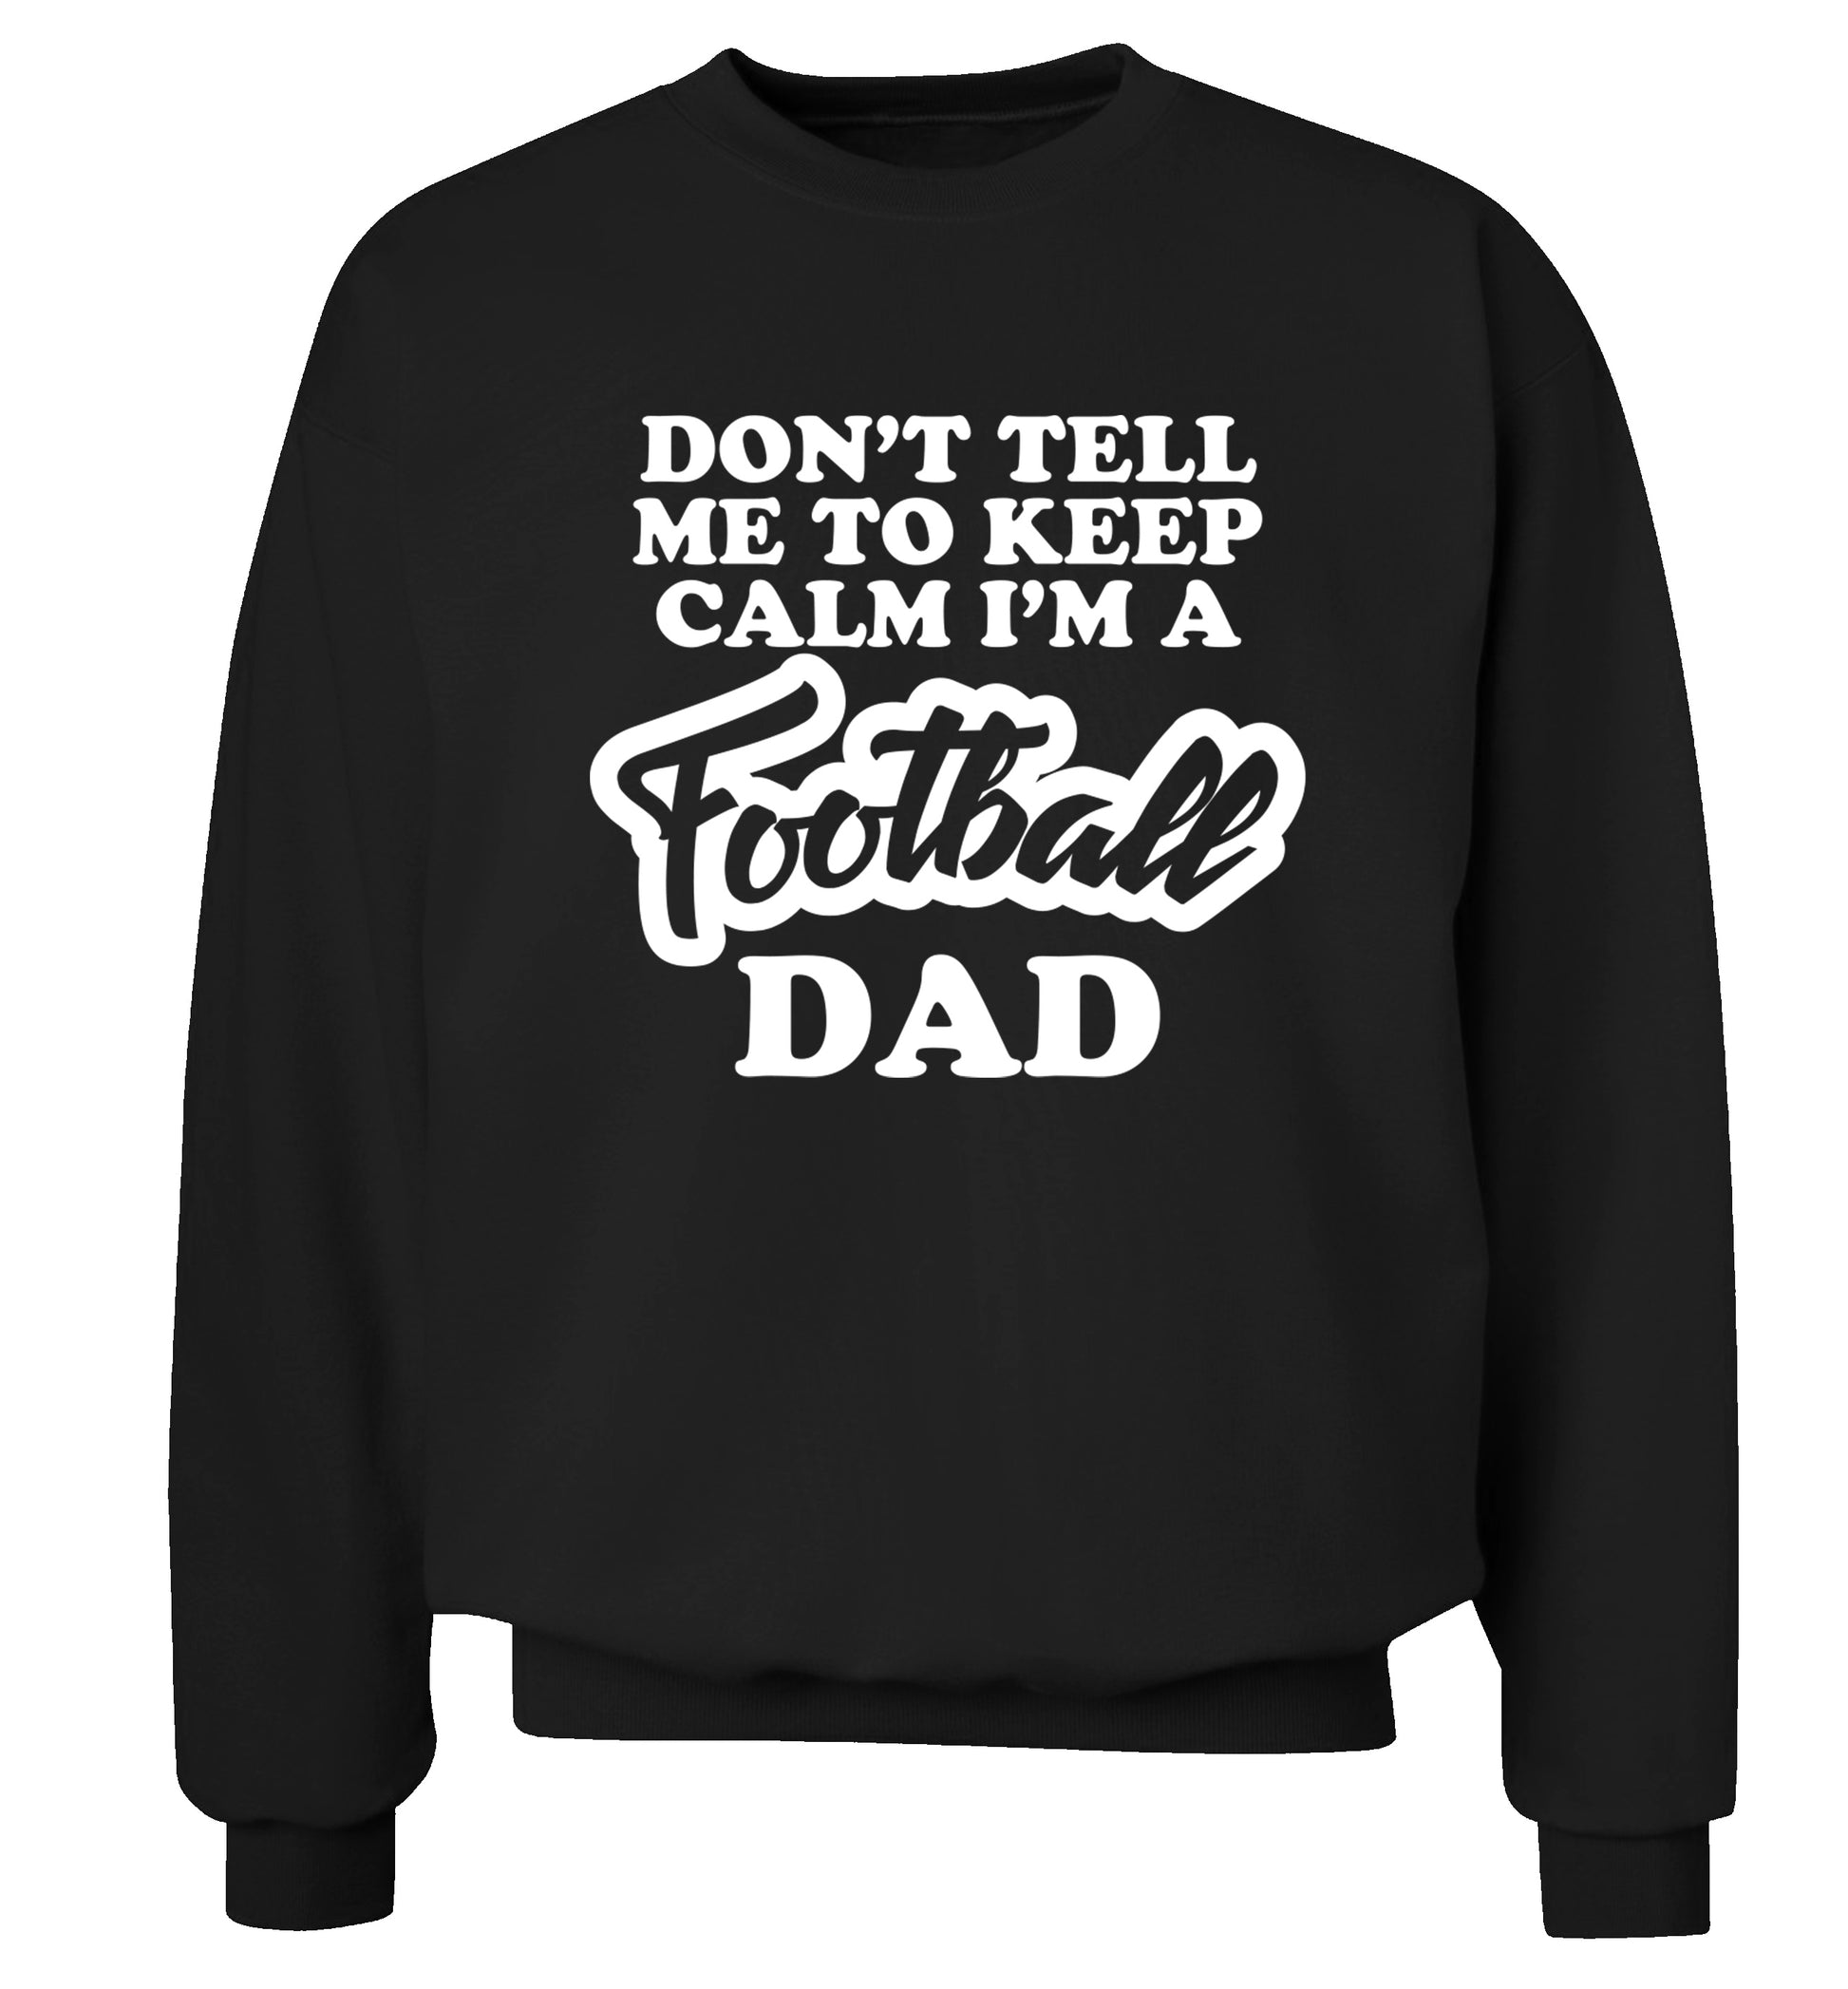 Don't tell me to keep calm I'm a football grandad Adult's unisexblack Sweater 2XL